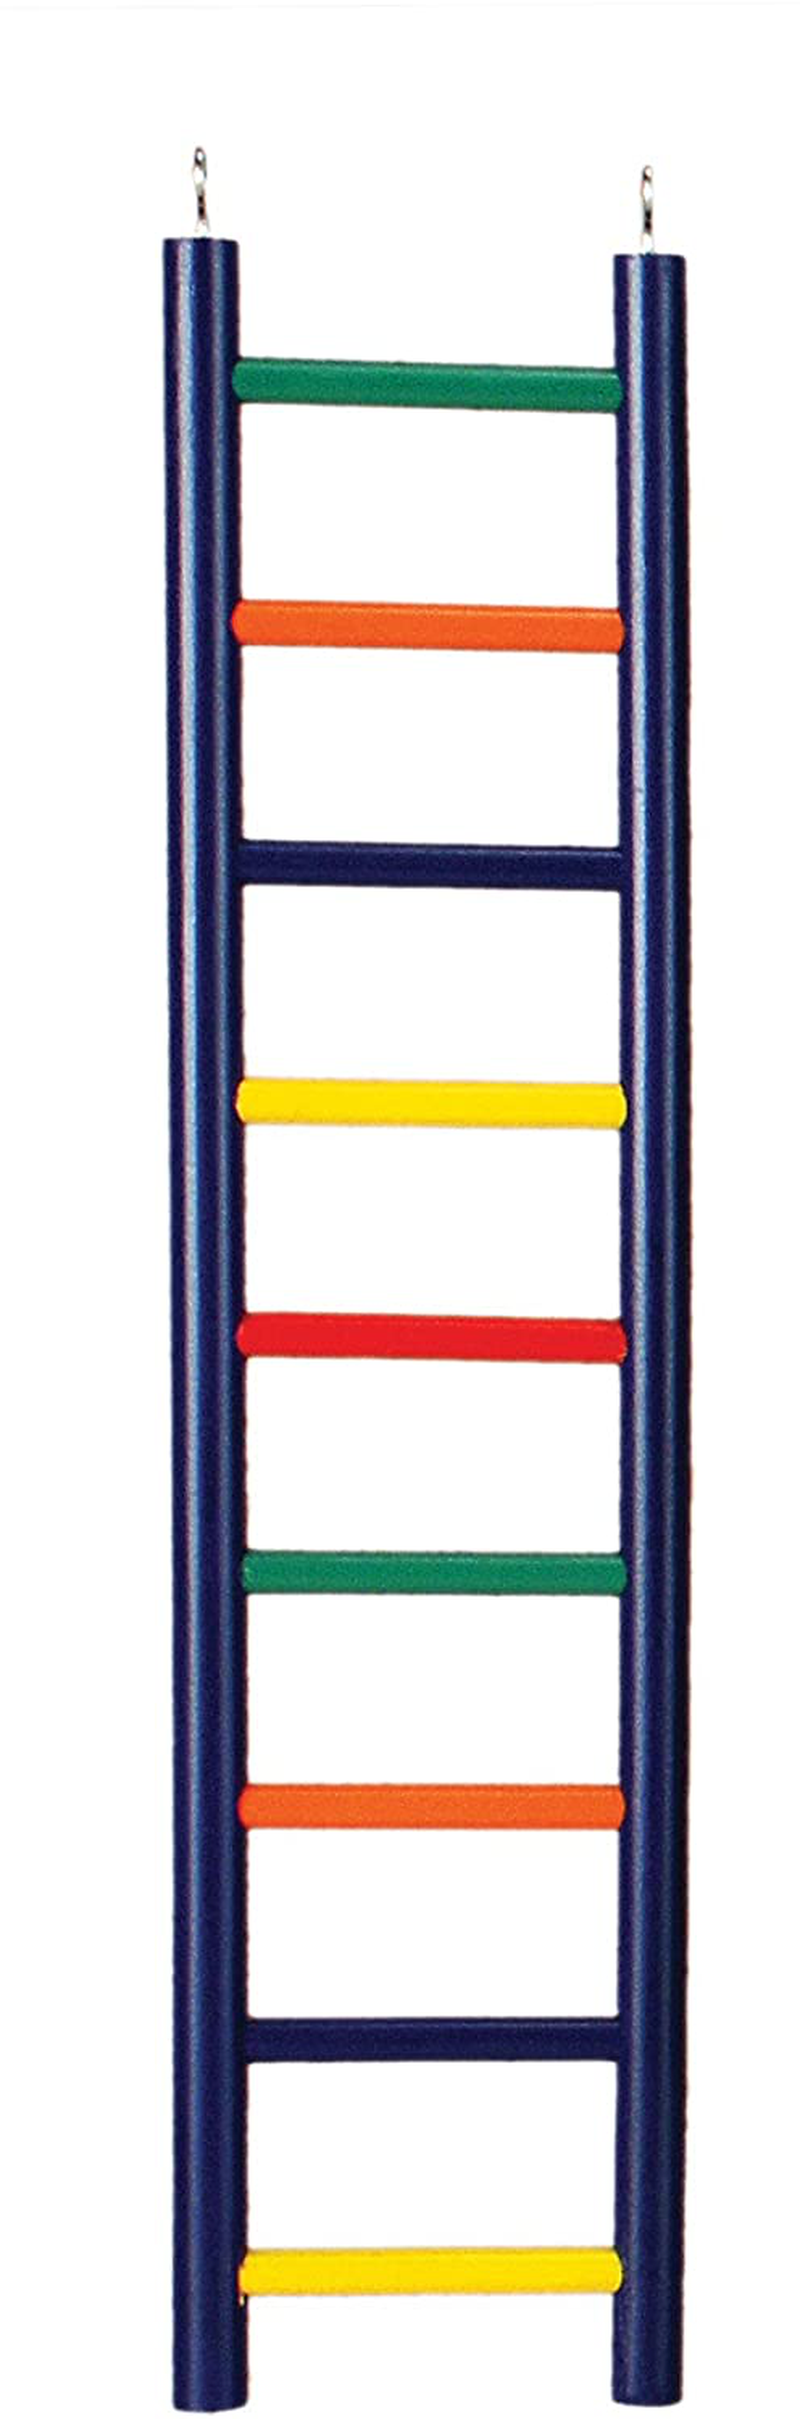 Prevue Pet Products BPV01137 Carpenter Creations Hardwood Bird Ladder with 9 Rungs, 18-Inch, Colors Vary Animals & Pet Supplies > Pet Supplies > Bird Supplies > Bird Ladders & Perches Prevue Pet Products   